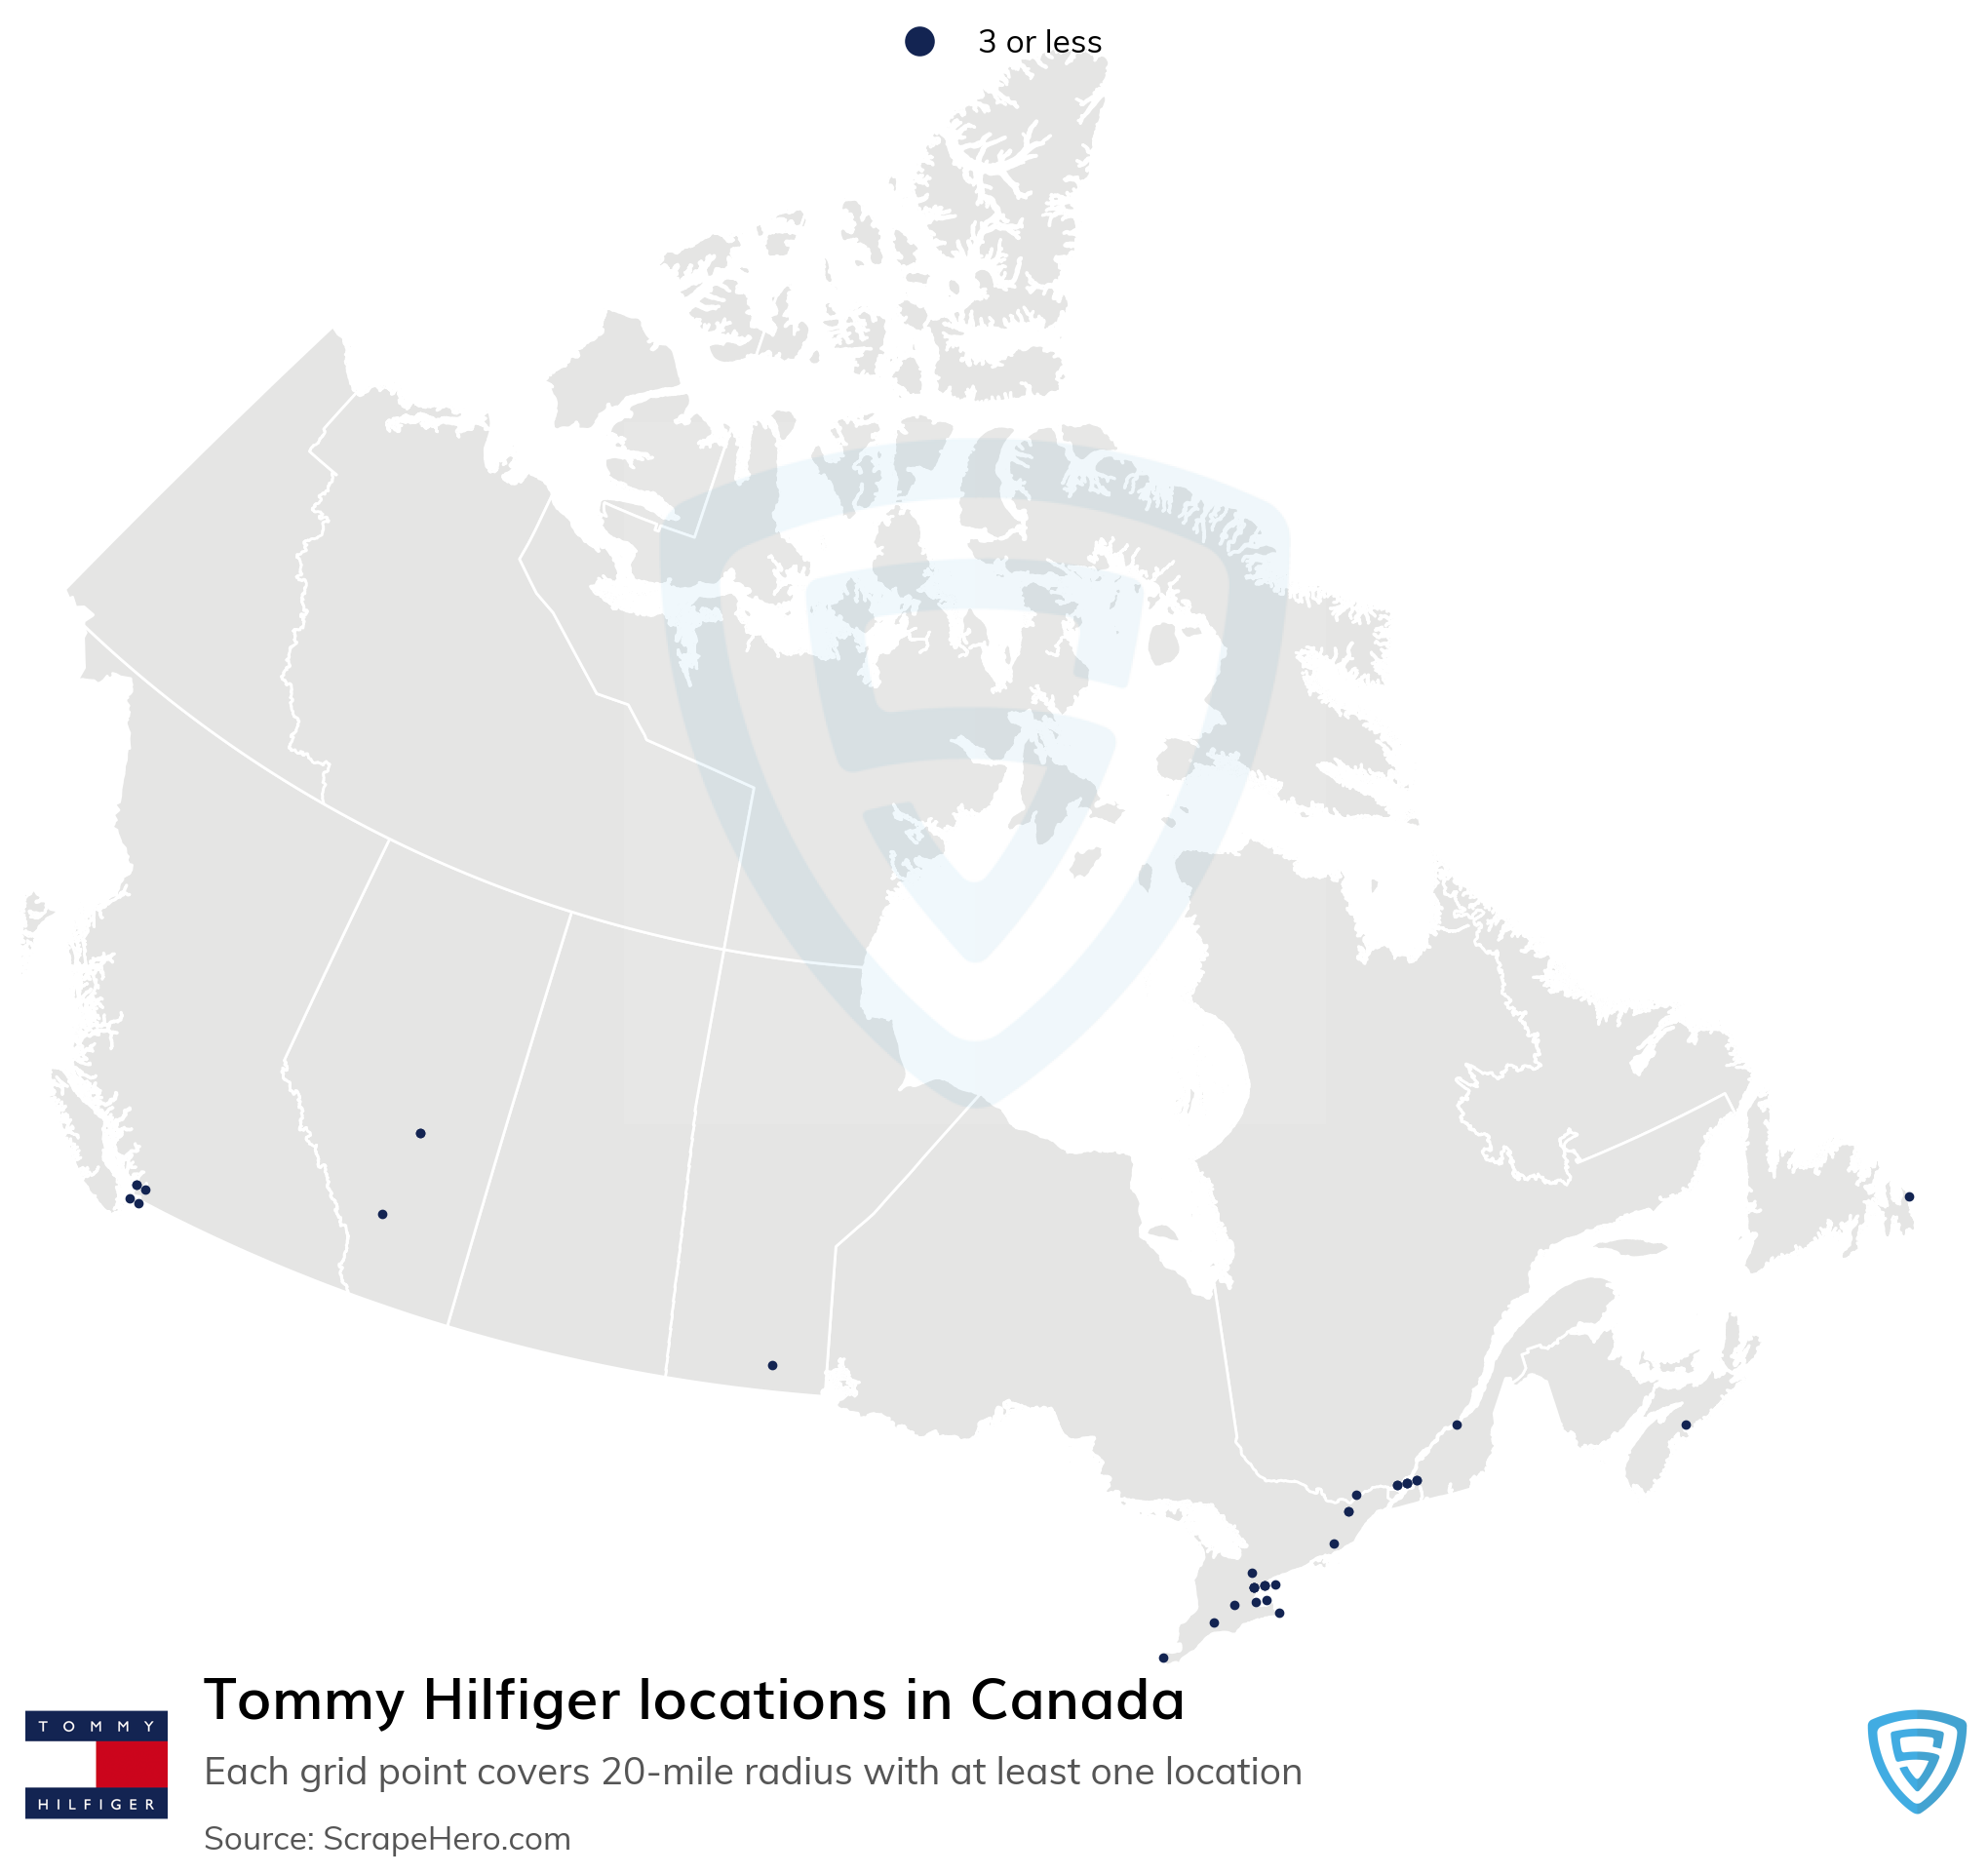 bypass east to withdraw List of all Tommy Hilfiger retail store locations in Canada - ScrapeHero  Data Store